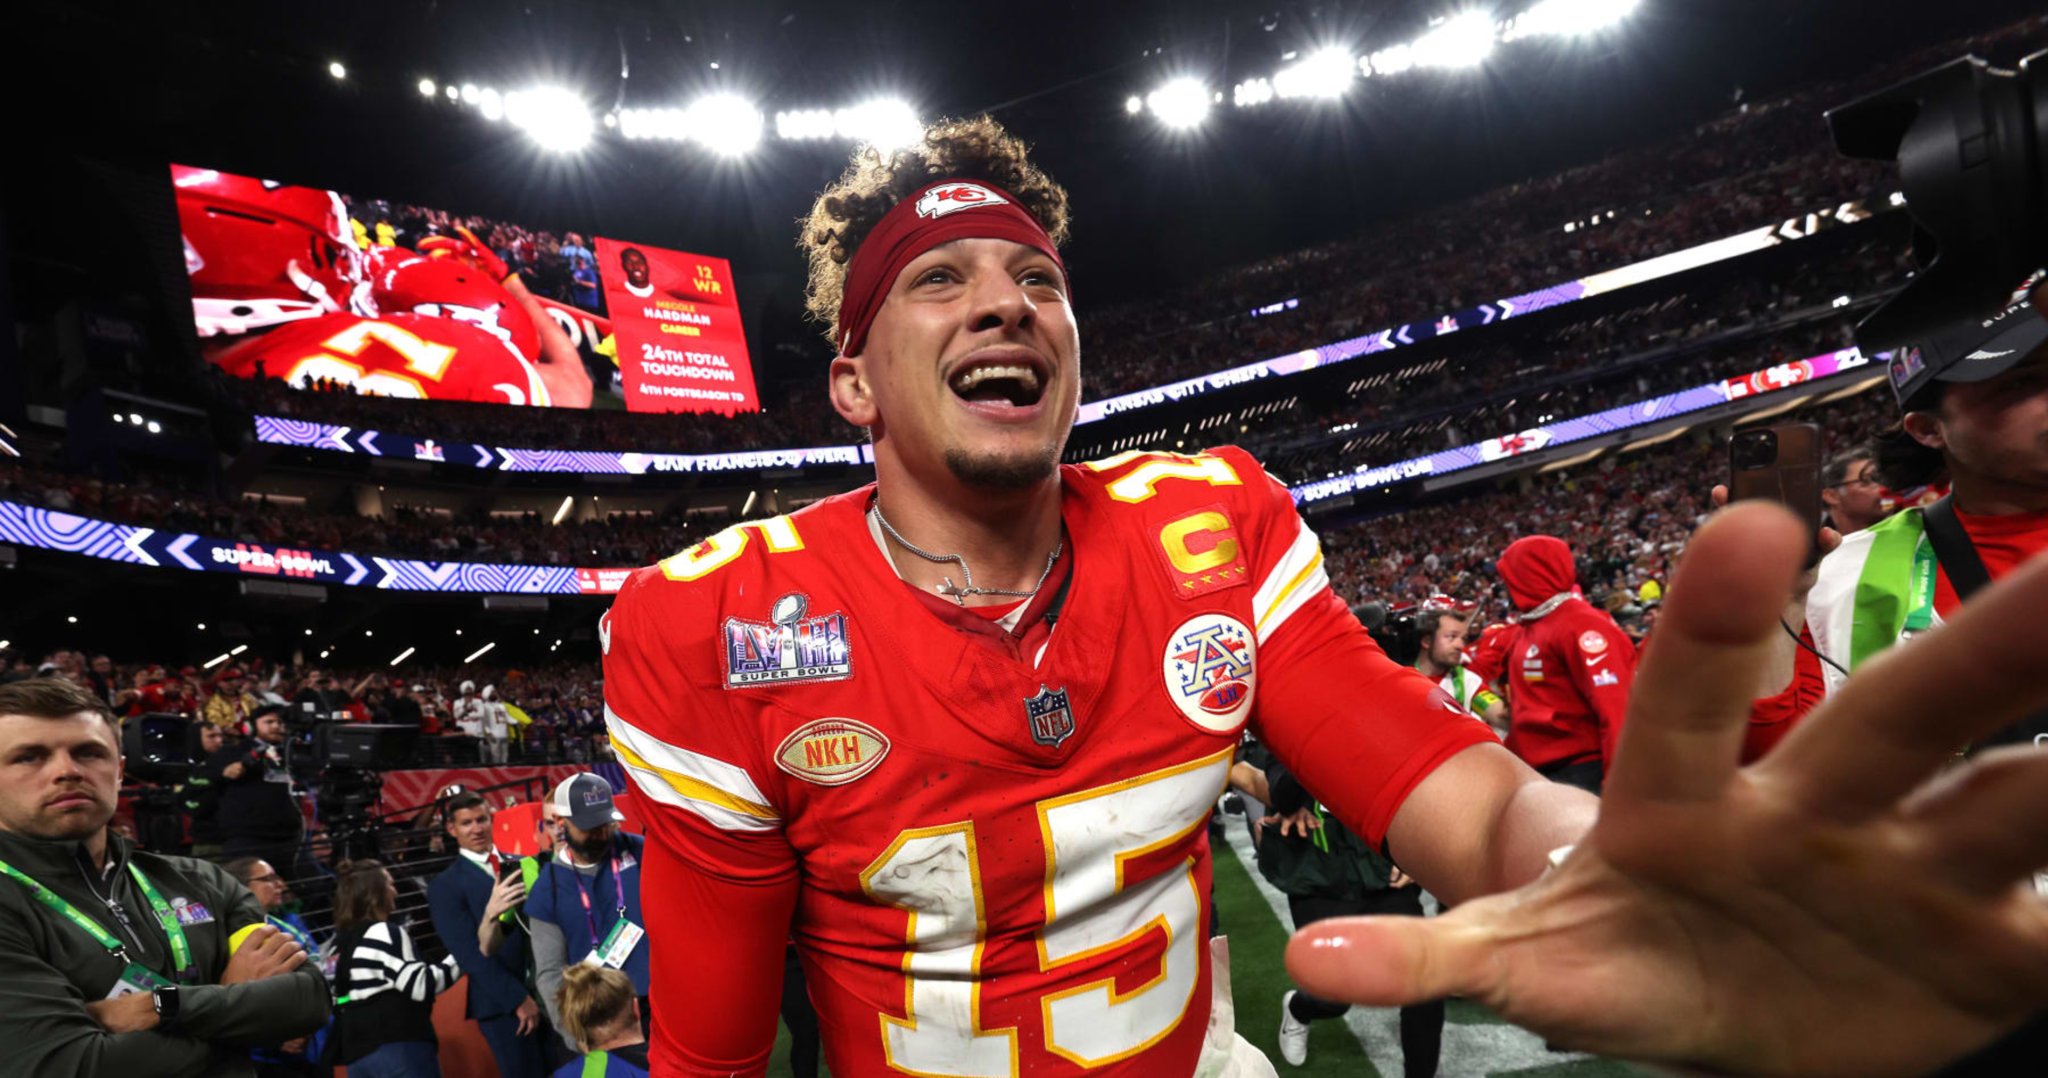 Patrick Mahomes Wins Super Bowl 58 MVP as Chiefs Beat 49ers to Repeat as Champions